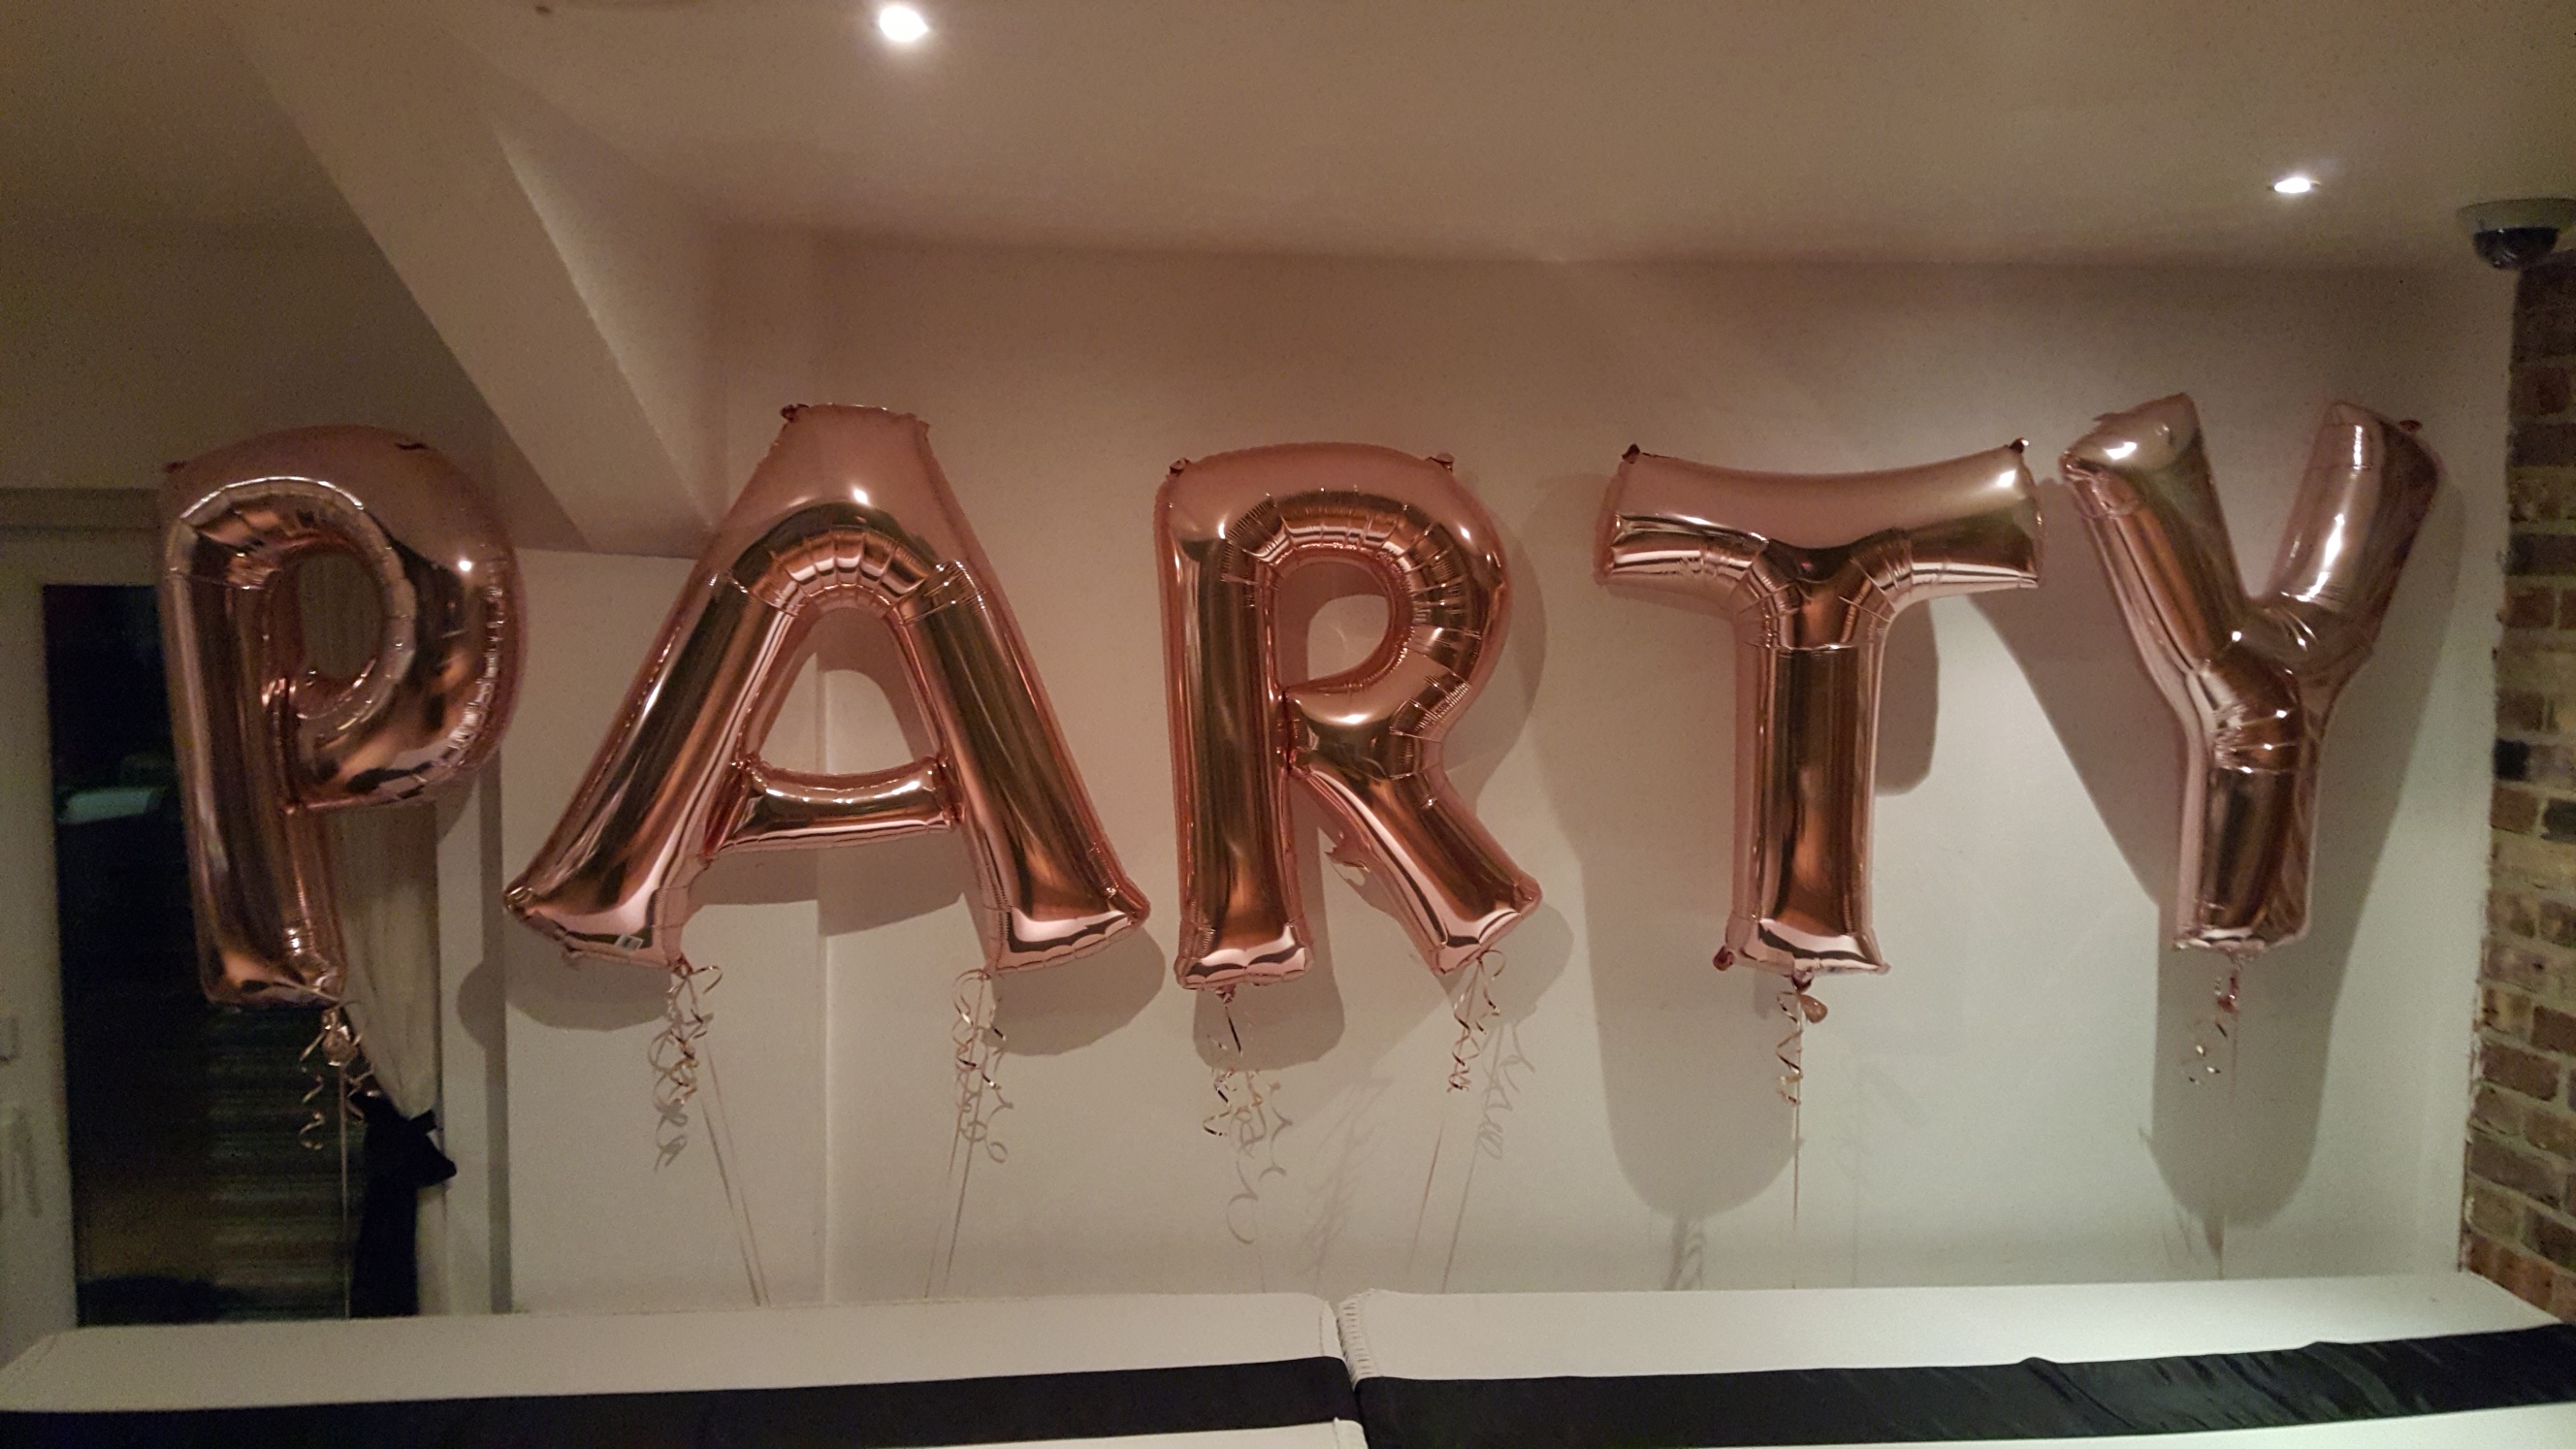 large letter balloons